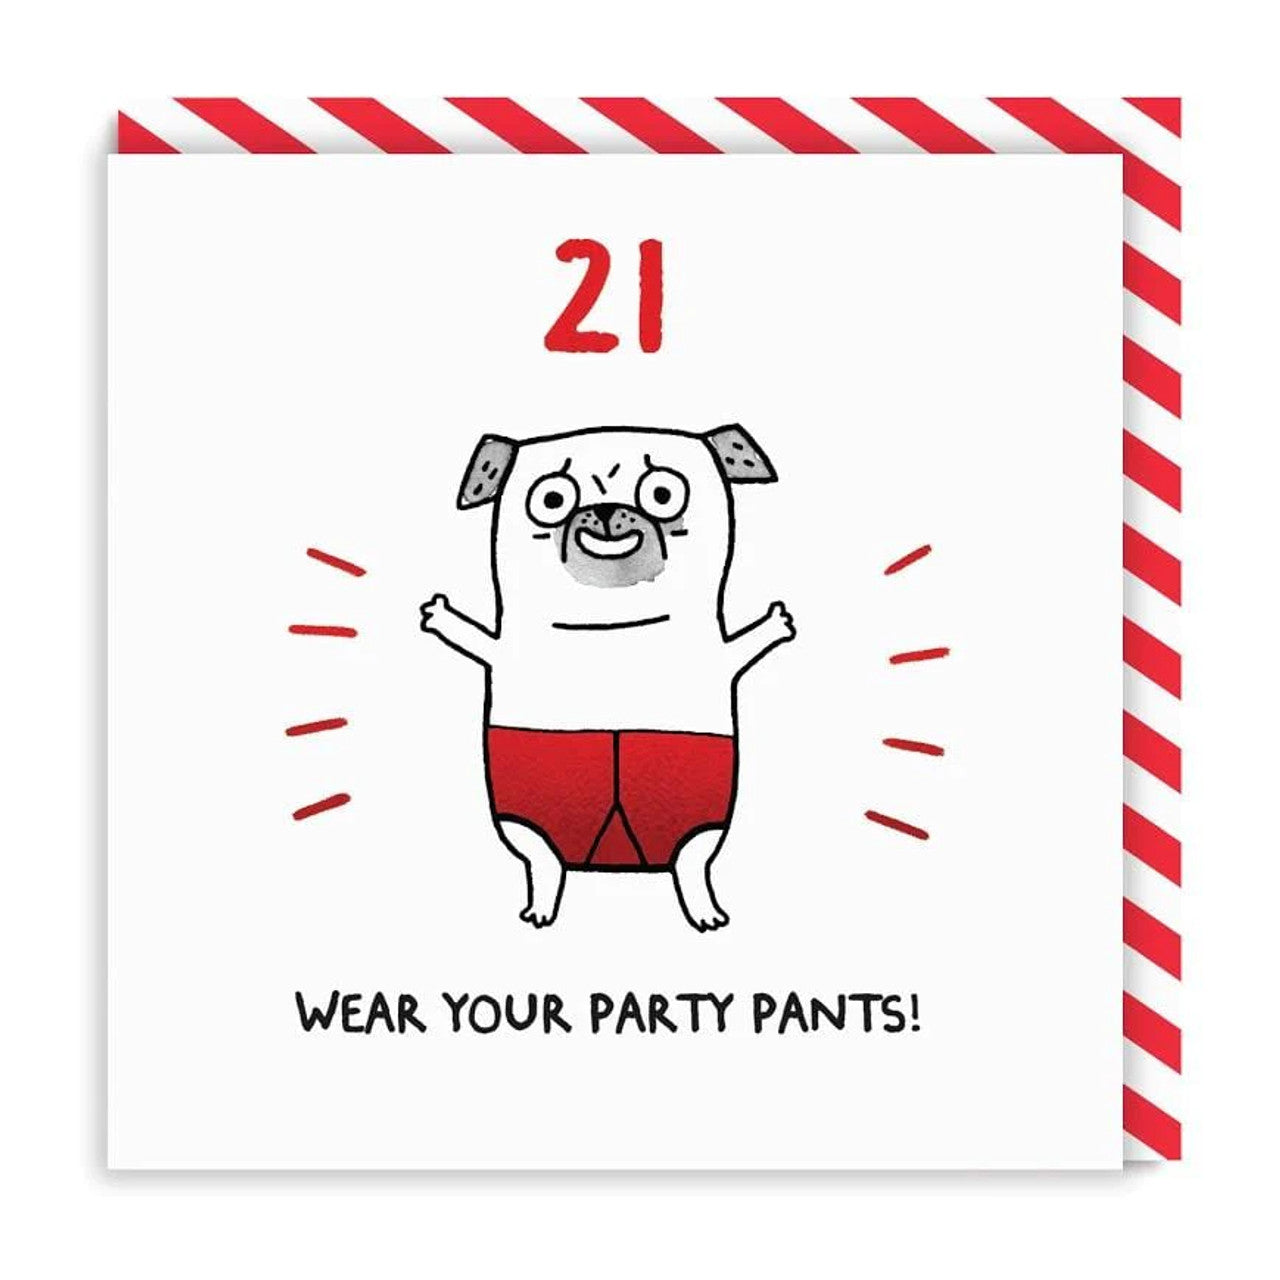 21st Birthday Card text reads "21 Wear your party pants!"